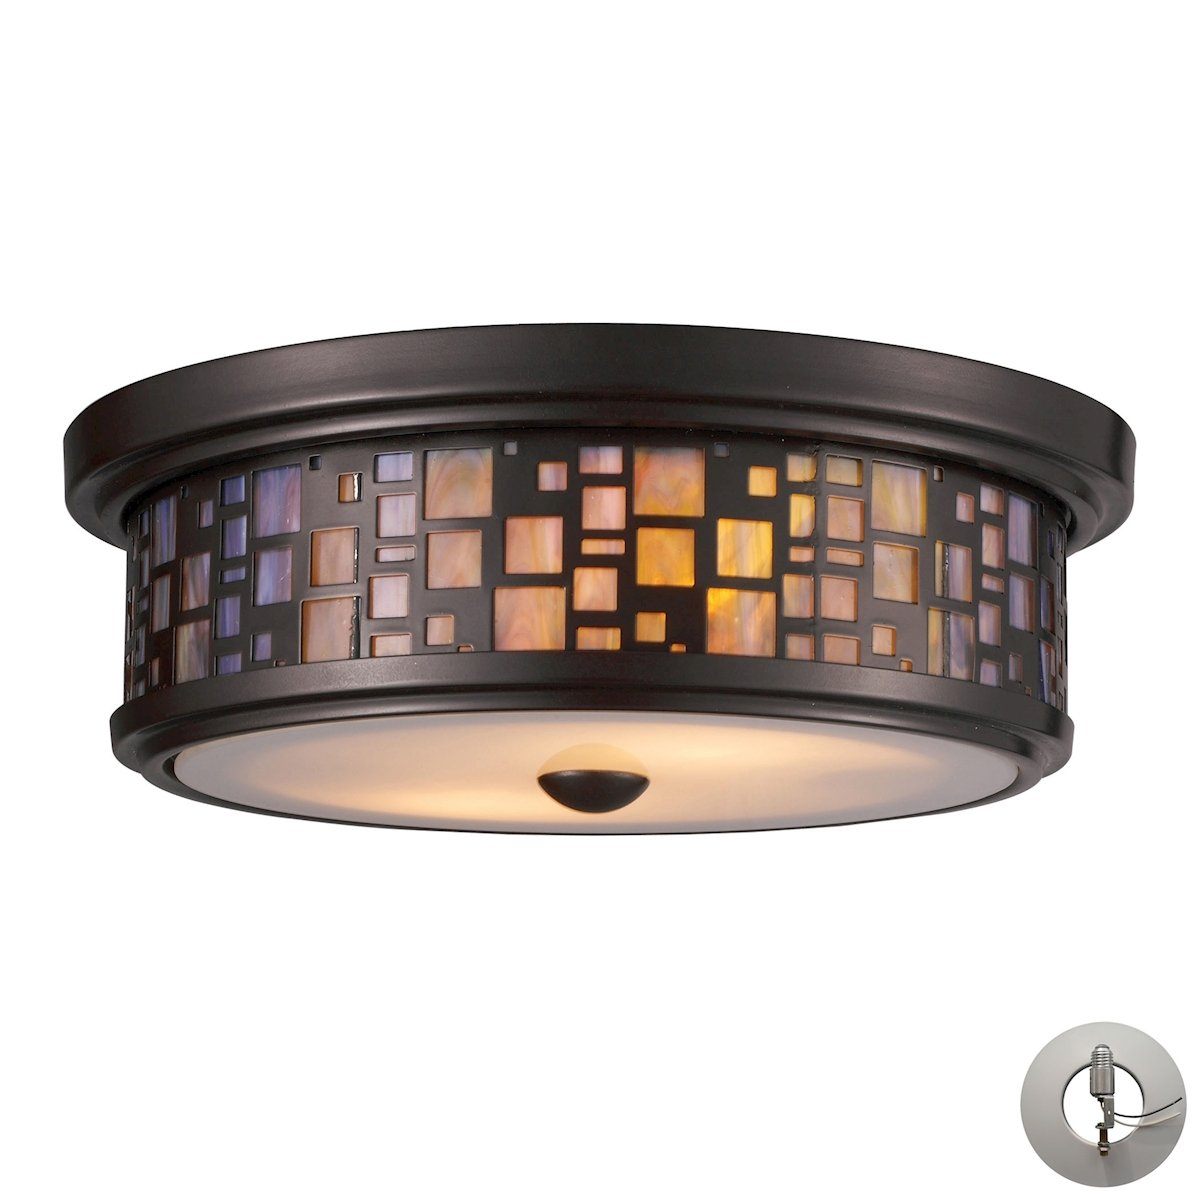 Tiffany Flushes 2 Light Flushmount In Oiled Bronze And Tea Stained Glass - Includes Recessed Lighting Kit Flush Mount Elk Lighting 